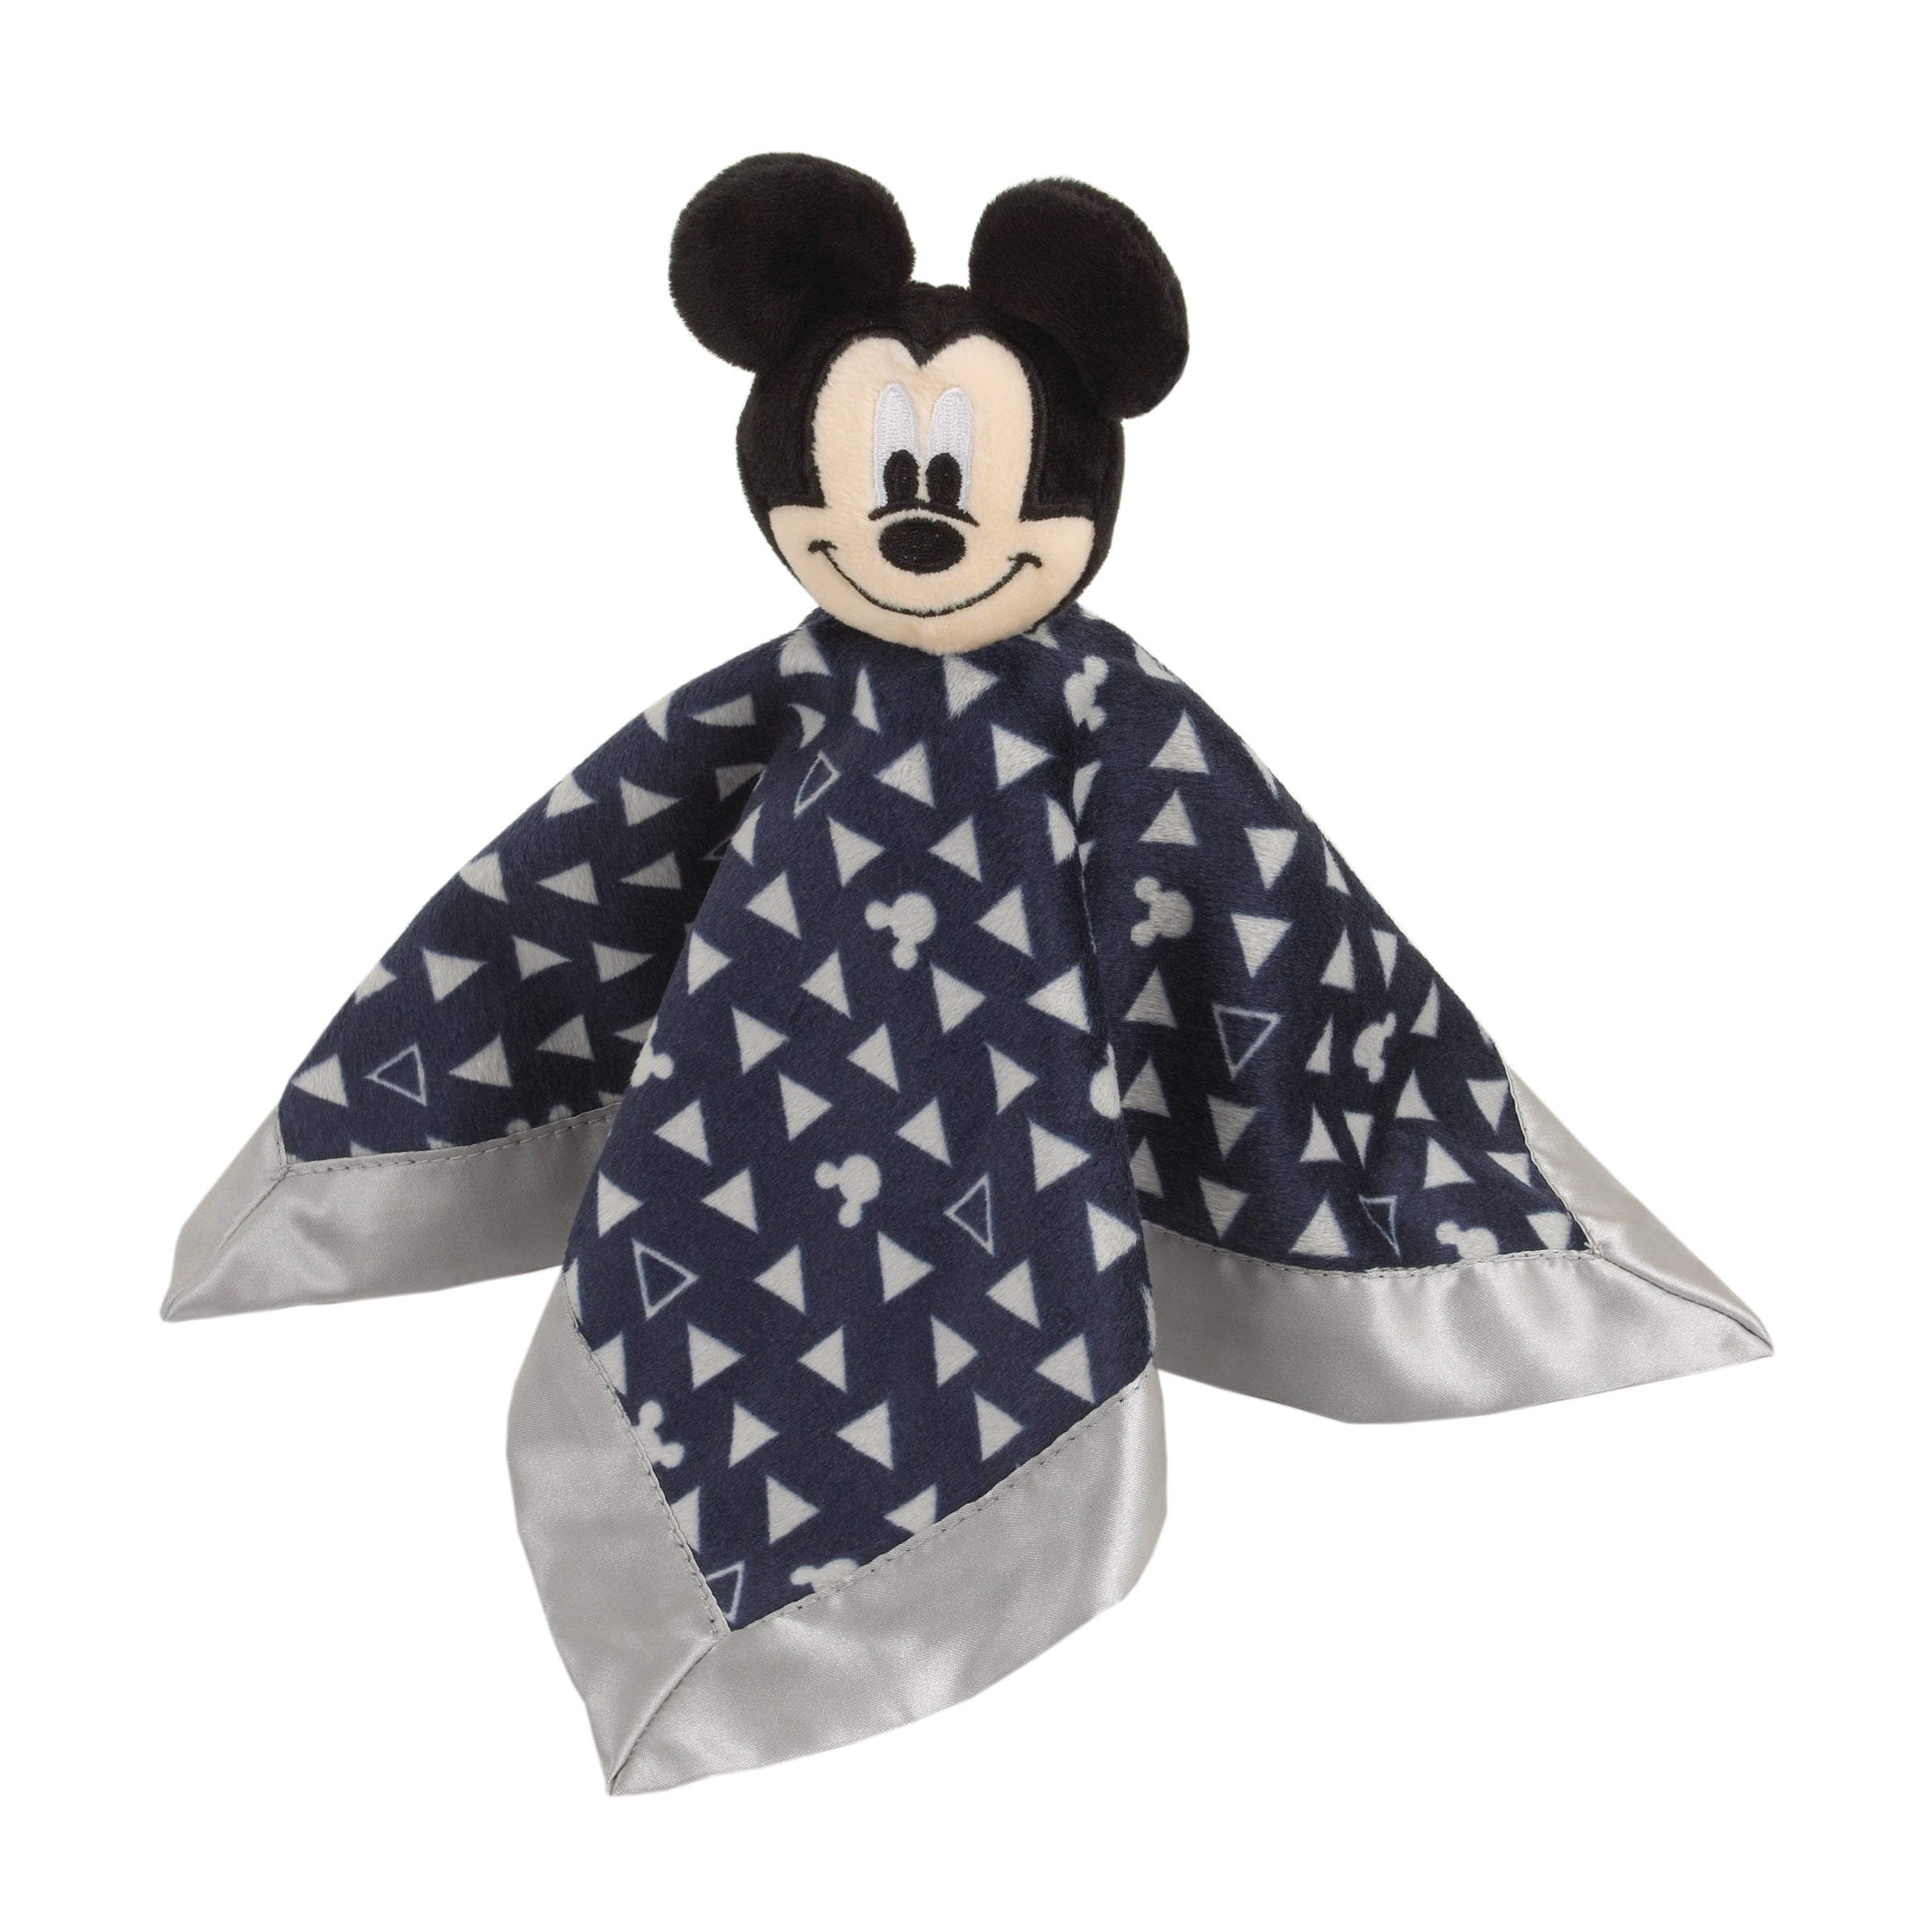 Disney Baby Mickey Mouse Security Blanket Kids Preferred Blue Boys Lovey NWT 